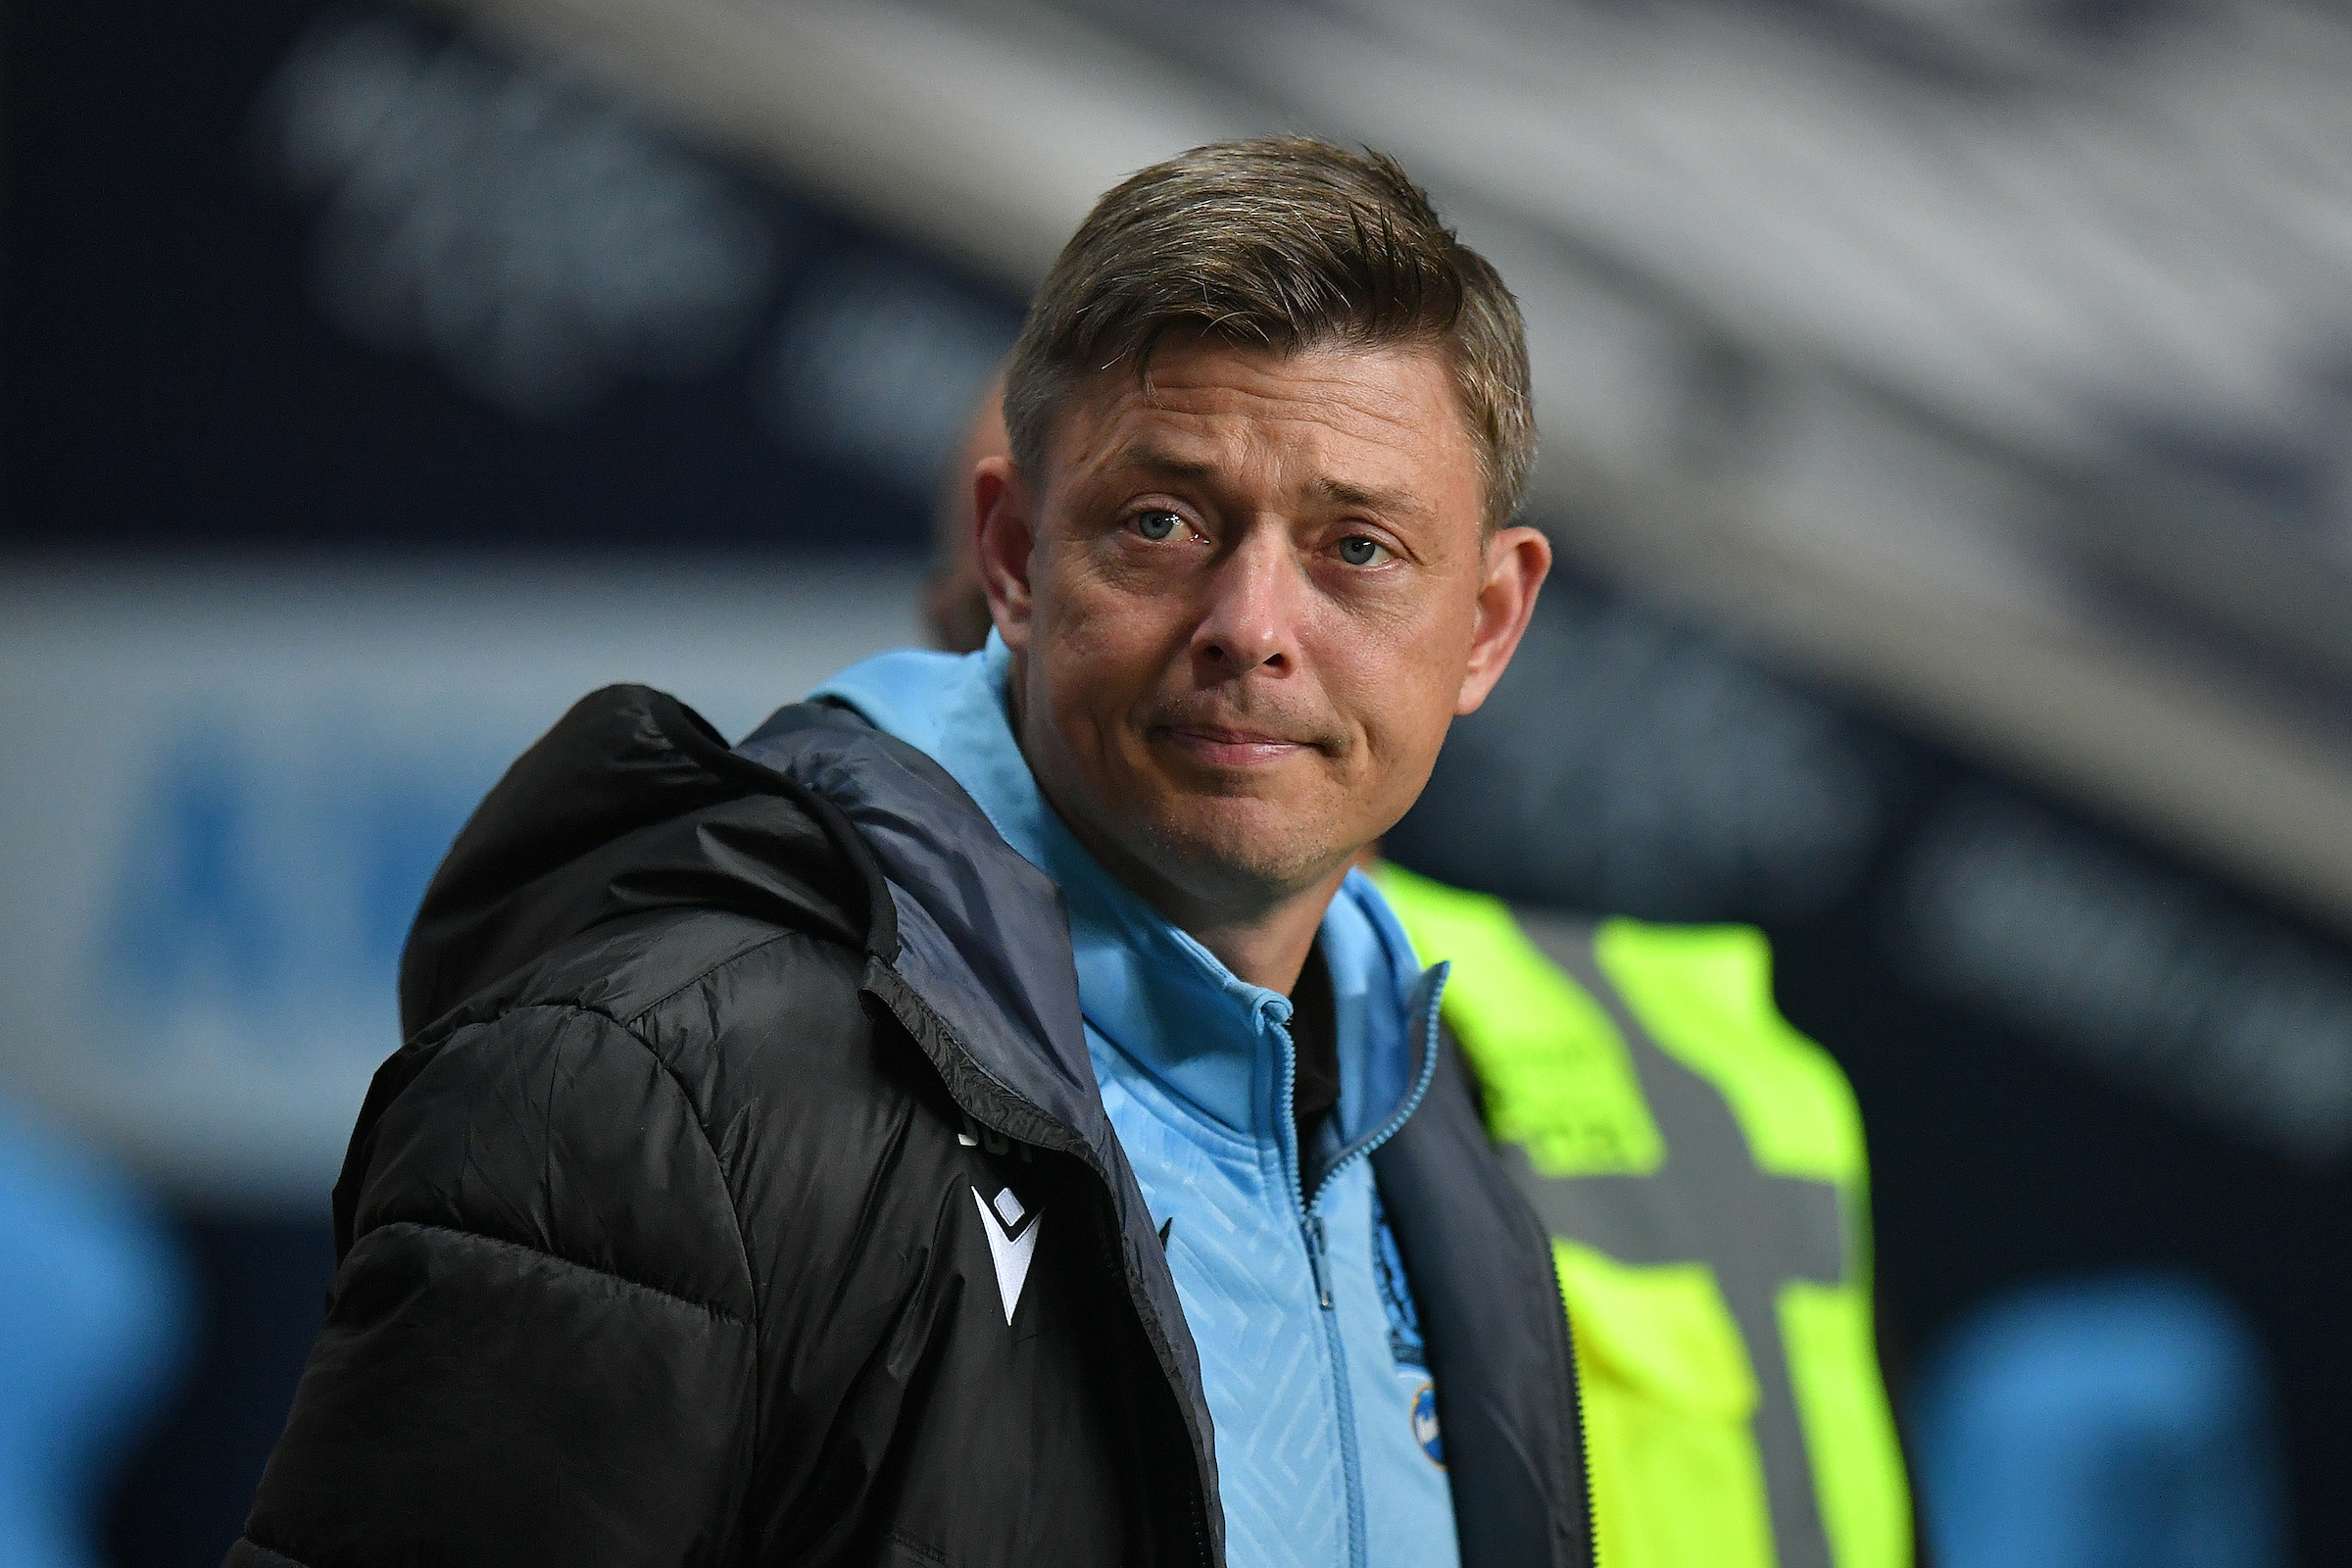 Tomasson on 'strange situation' during Blackburn Rovers loss